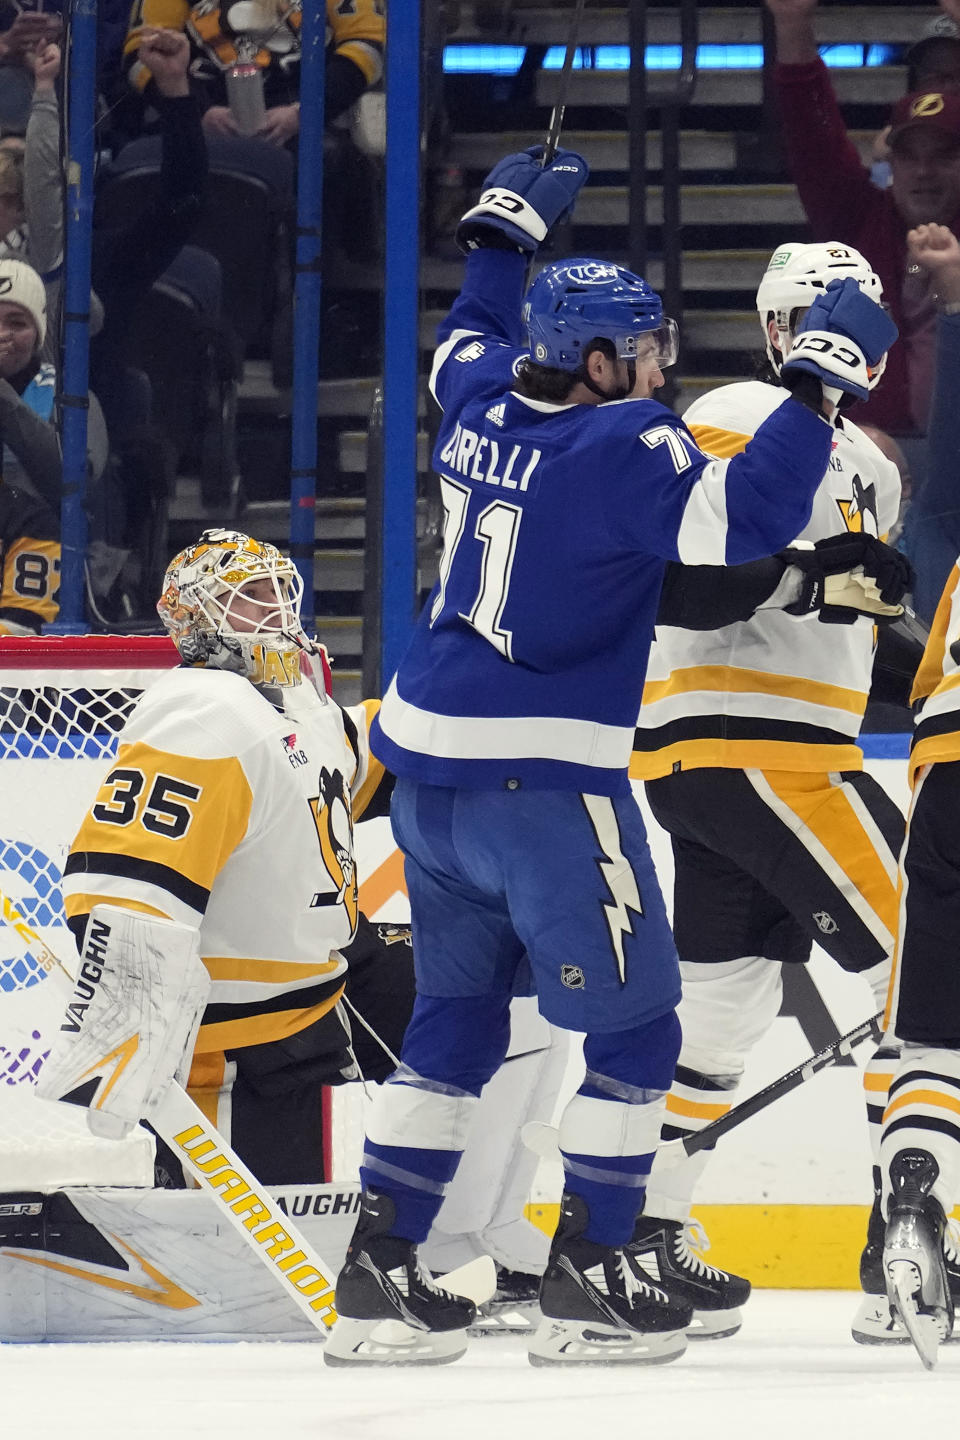 Tampa Bay Lightning center Anthony Cirelli (71) celebrates after scoring past Pittsburgh Penguins goaltender Tristan Jarry (35) during the first period of an NHL hockey game Wednesday, Dec. 6, 2023, in Tampa, Fla. (AP Photo/Chris O'Meara)